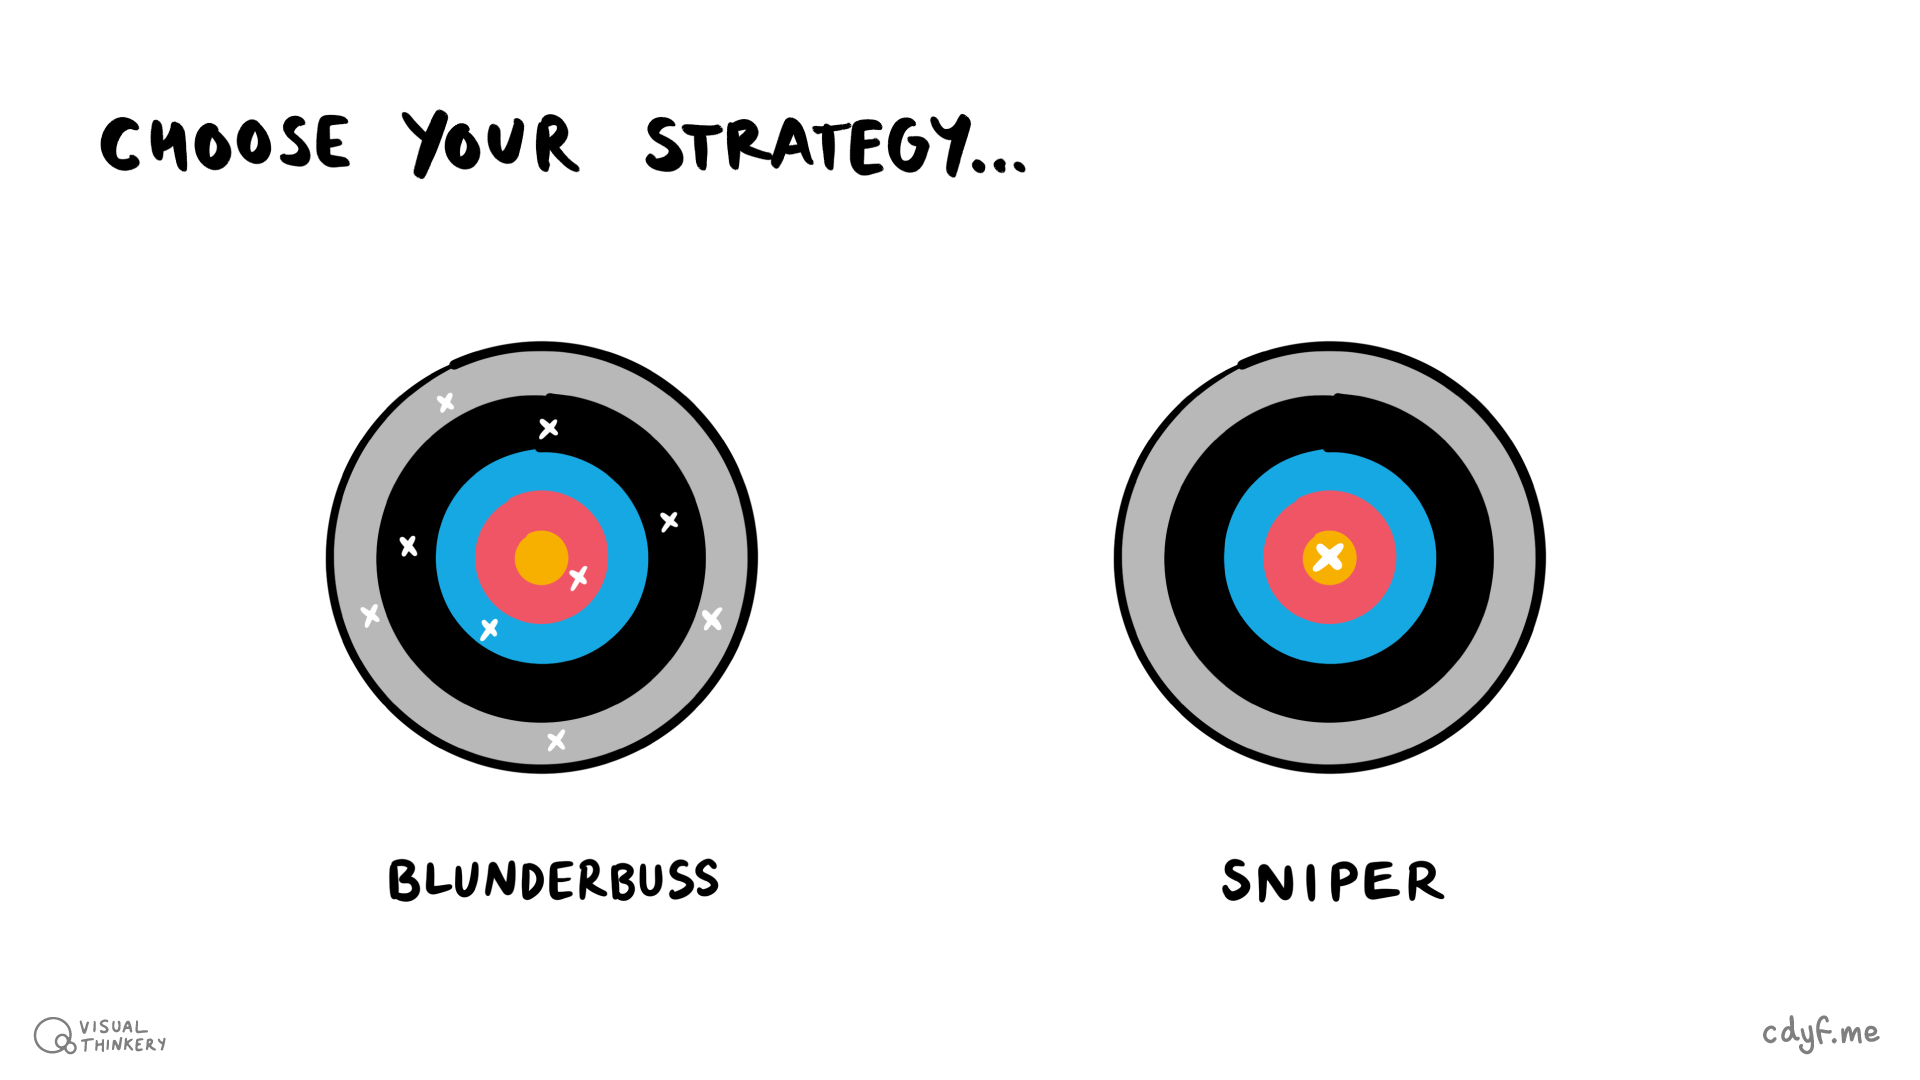 As you target employers, what will your strategy be? At one extreme you could optimise the quantity of your applications, aiming to do as many as you can. This is shown in the left of the picture by the blunderbuss (or scattergun) strategy. You make lots of applications but don’t target or tailor them much in the hope that some will hit the target if you point your weapon (CV) in approximately the right general direction. At the other extreme you could optimise the quality of your applications by spending more time researching the employer and carefully aiming your shots more like a sniper would (in the right of the figure). Which strategy is best? Blunderbuss sketch by Visual Thinkery is licensed under CC-BY-ND